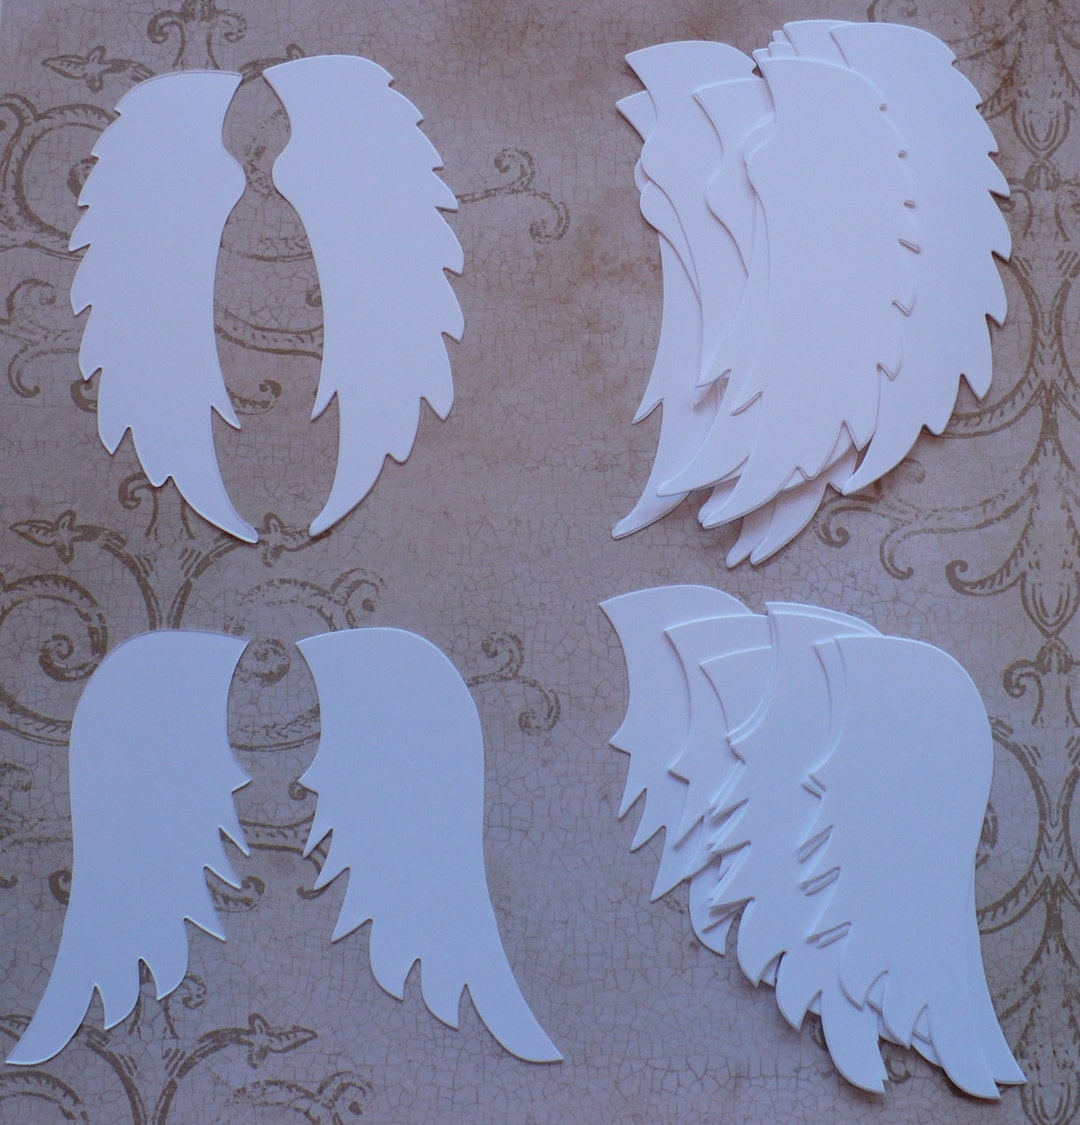 PAPER PLATE WINGS - Mini Mad Things